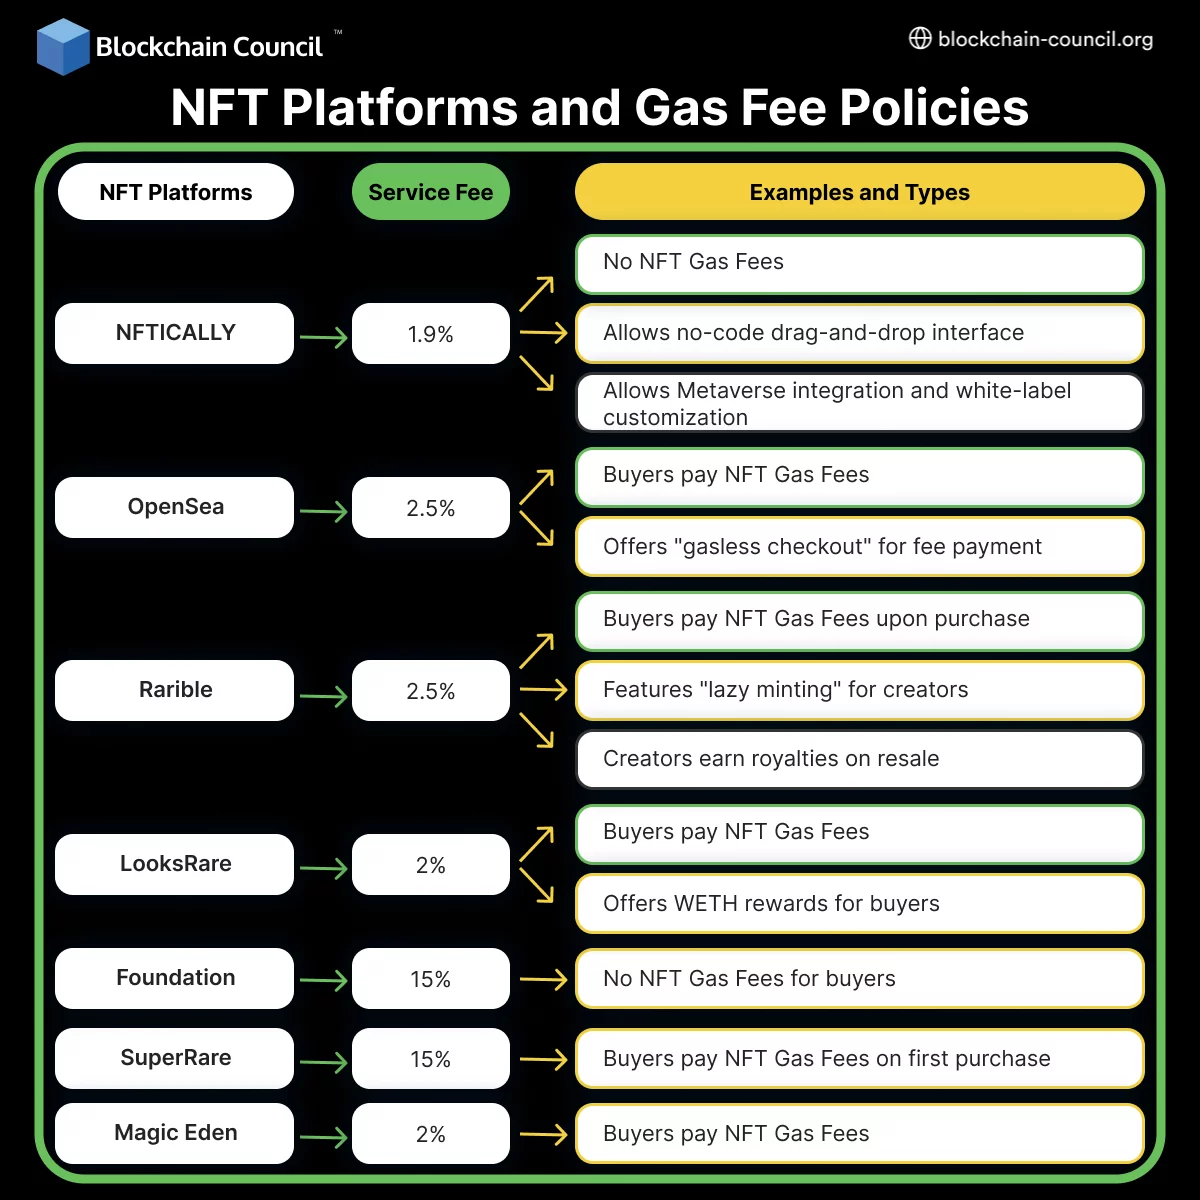 NFT Platforms and Gas Fee Policies